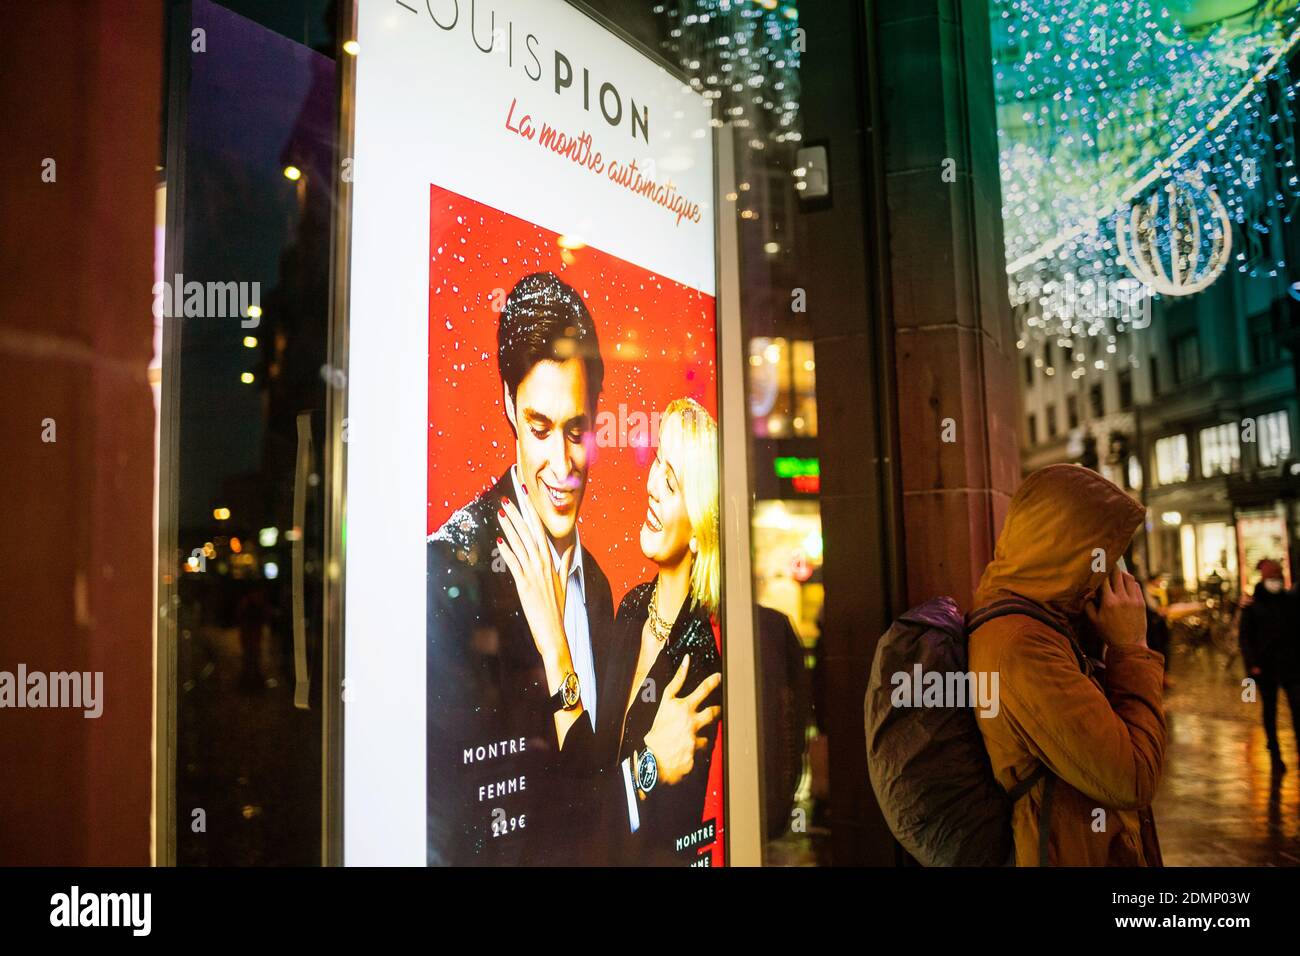 Strasbourg, France - Dec 4, 2020: Advertising for Louis Pion fashion  accessories jewelry on digital signal board display ooh in central  Strasbourg during annual christmas market decoration Stock Photo - Alamy